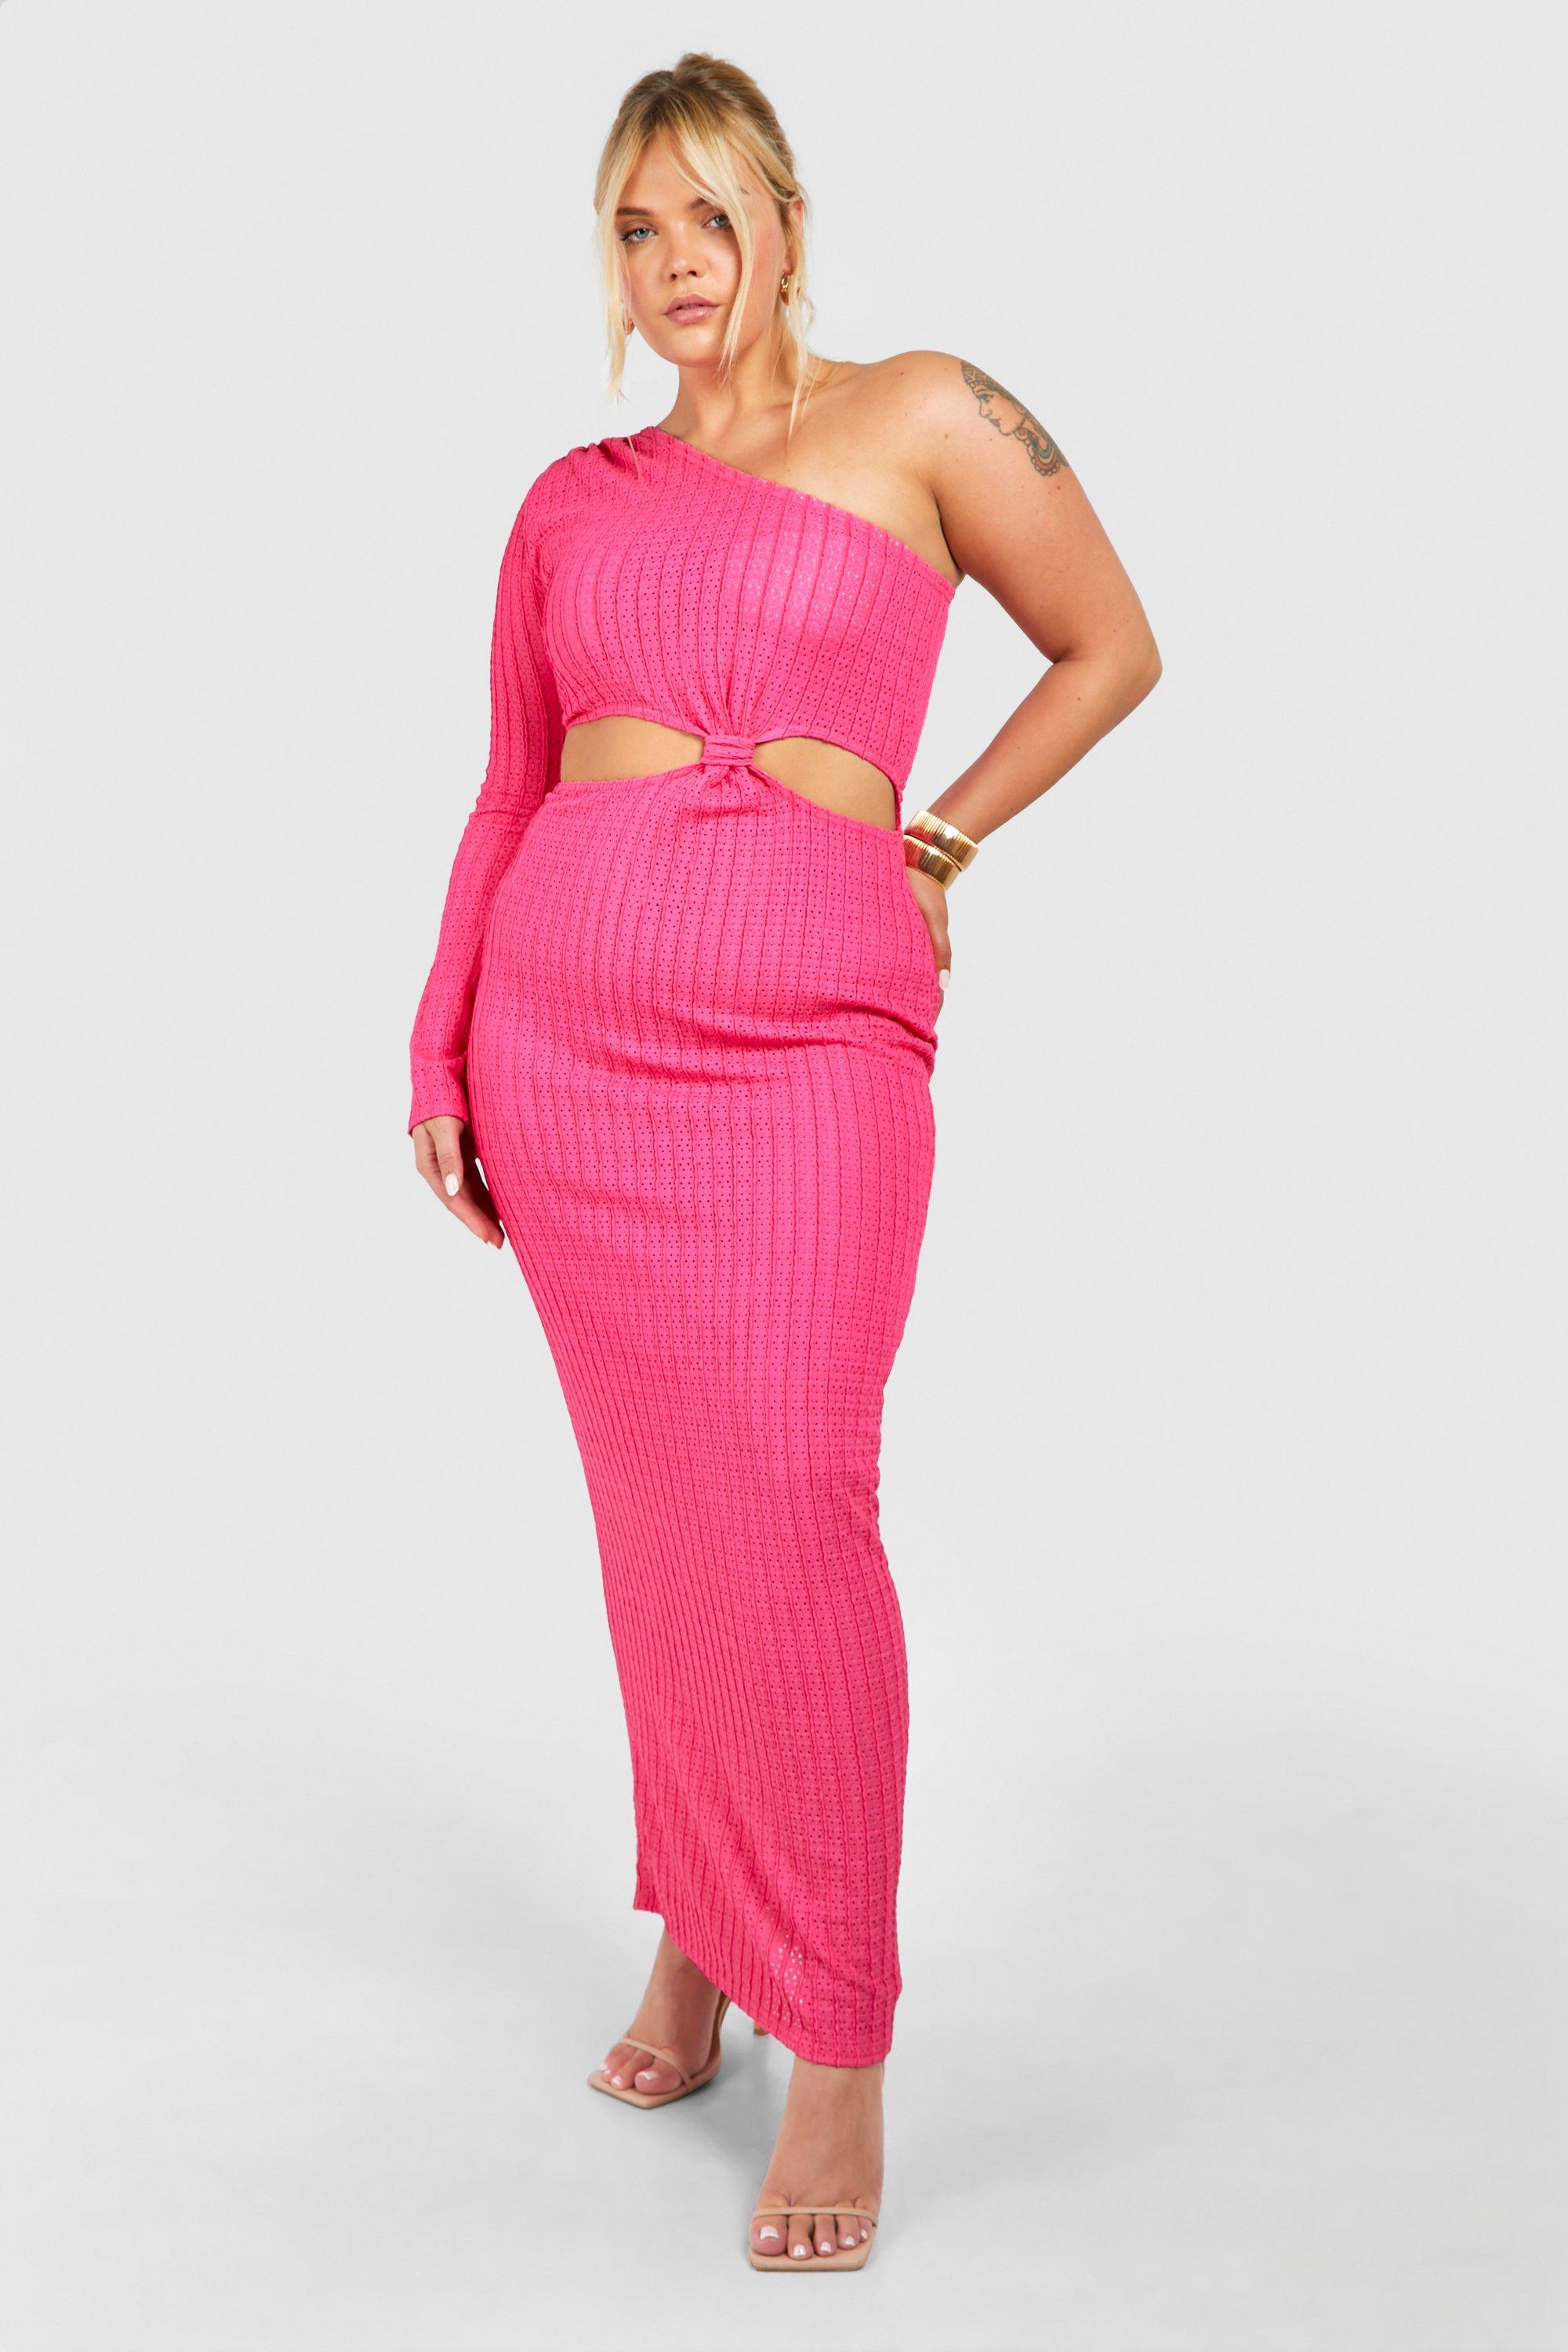 Boohoo Plus Textured Cut Out One Shoulder Maxi Dress, Hot Pink